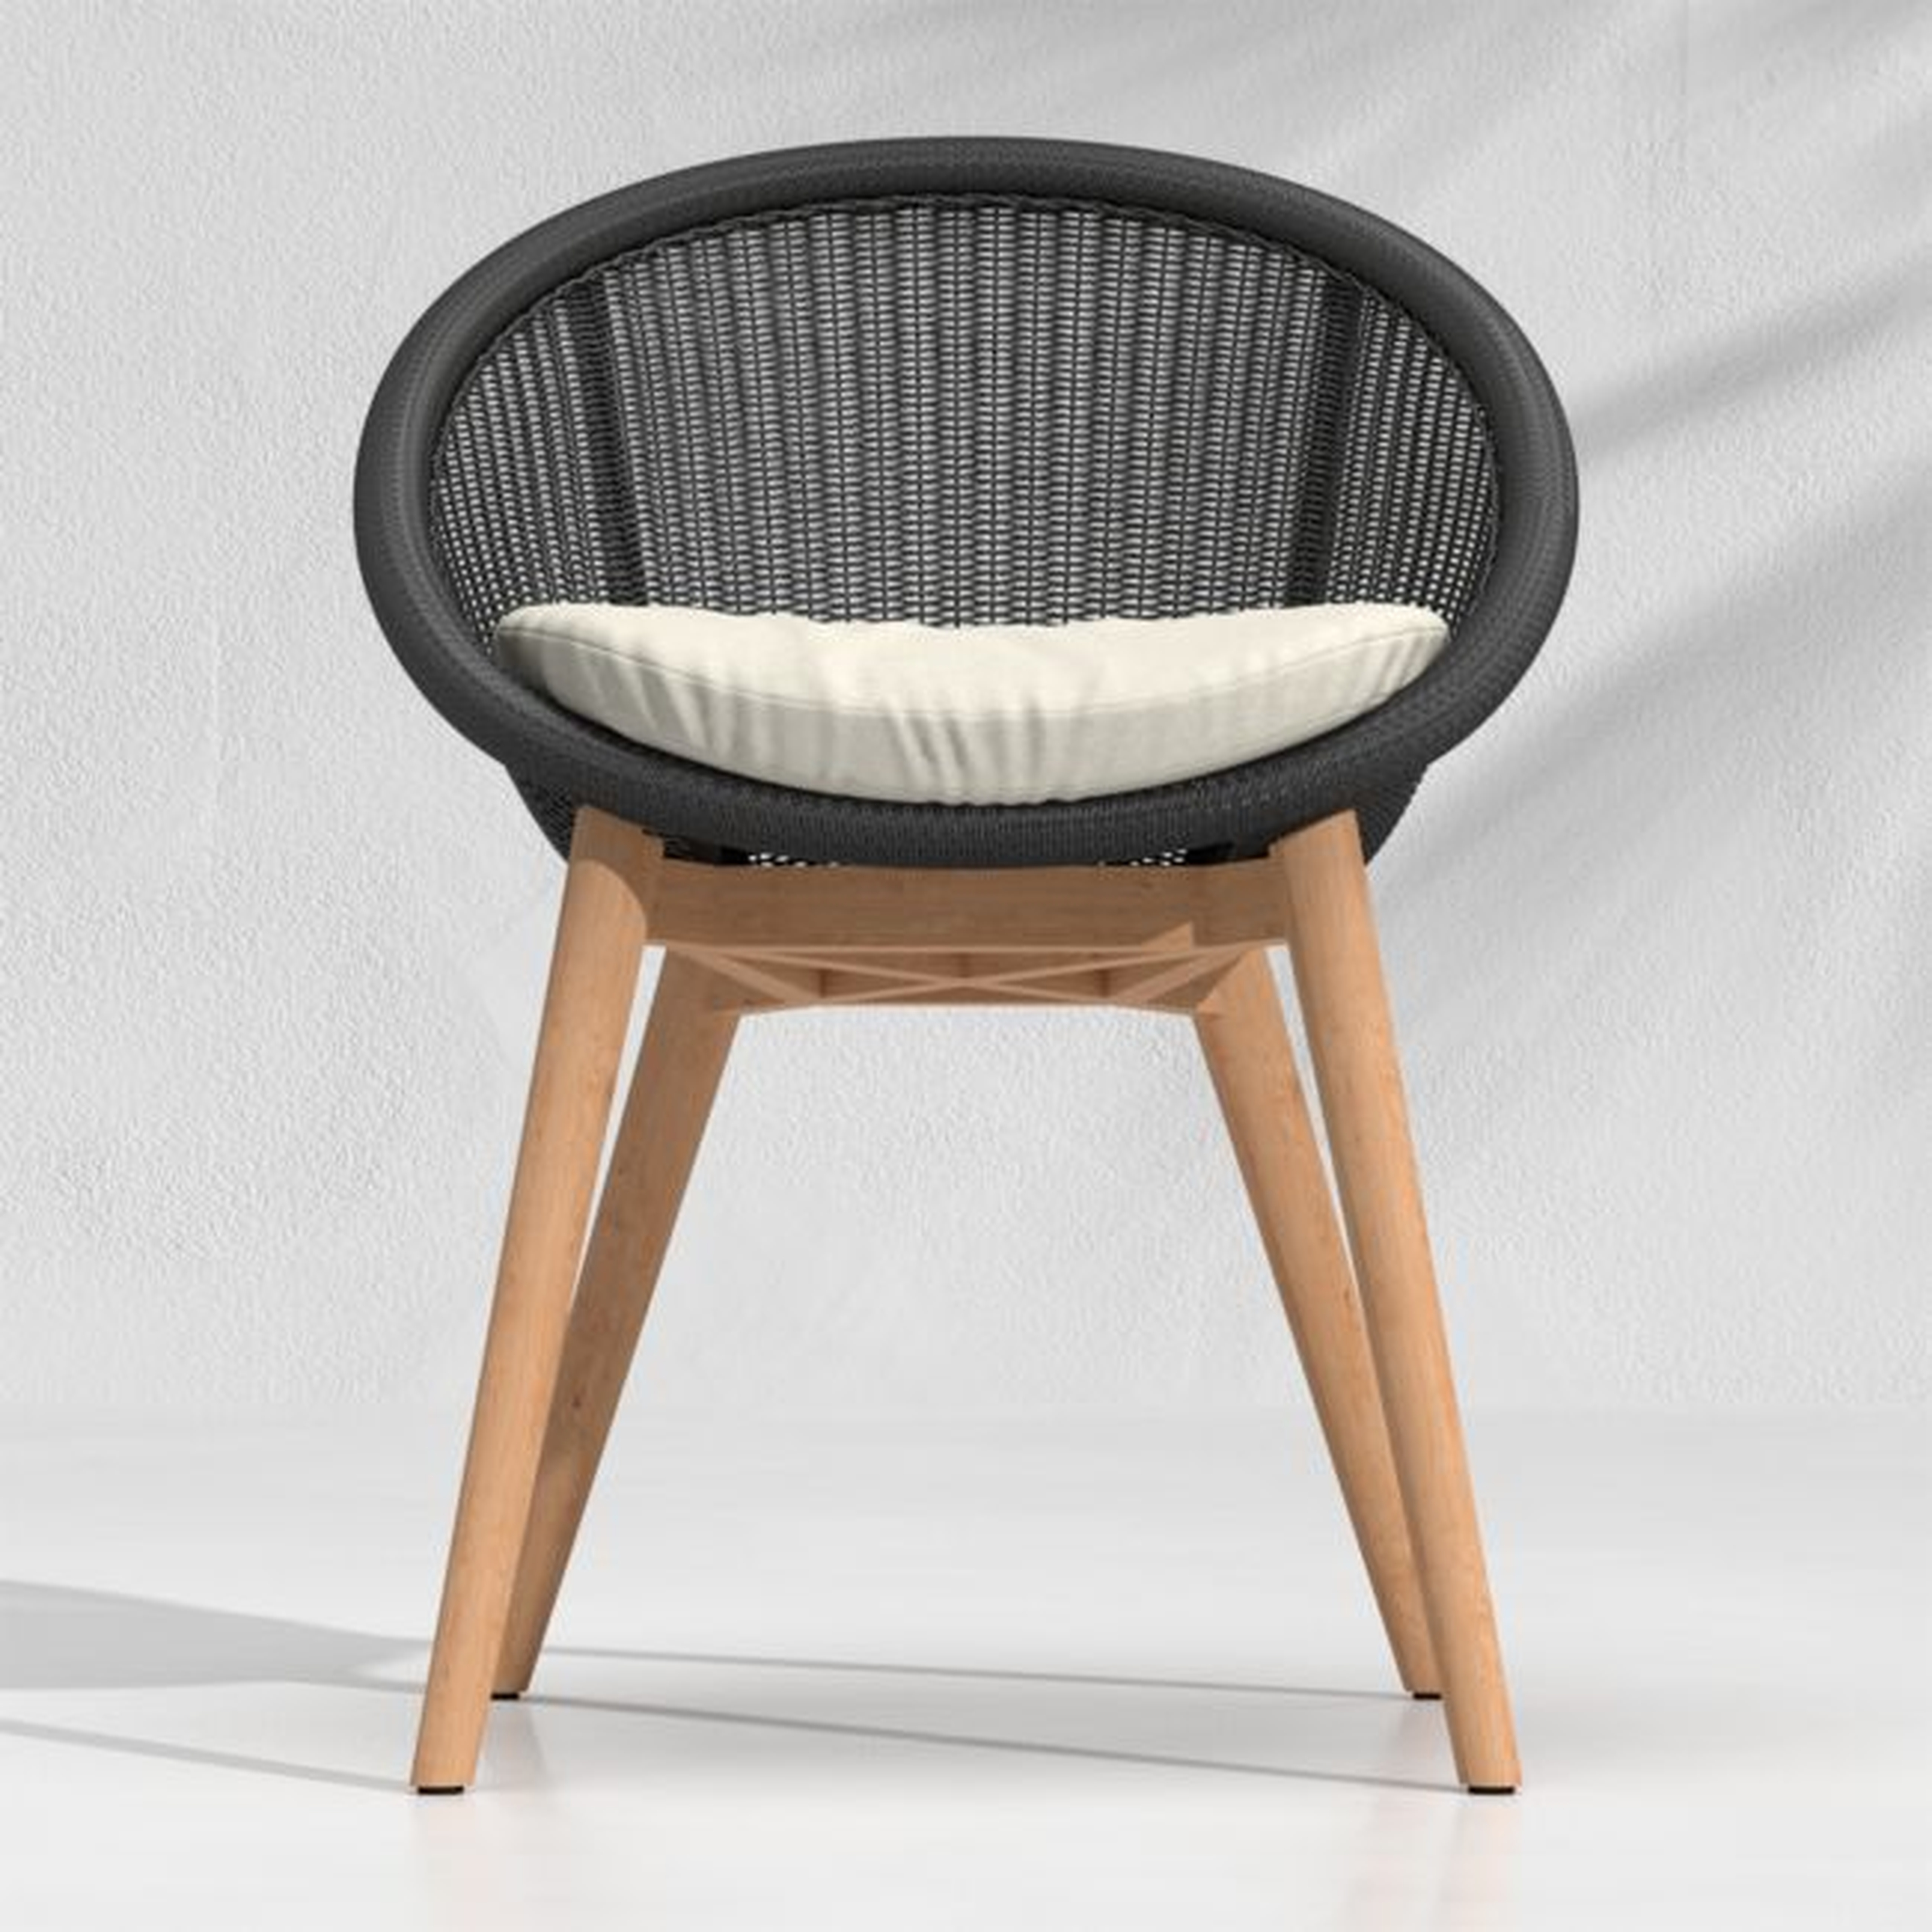 Loon Black Outdoor Dining Chair - Crate and Barrel